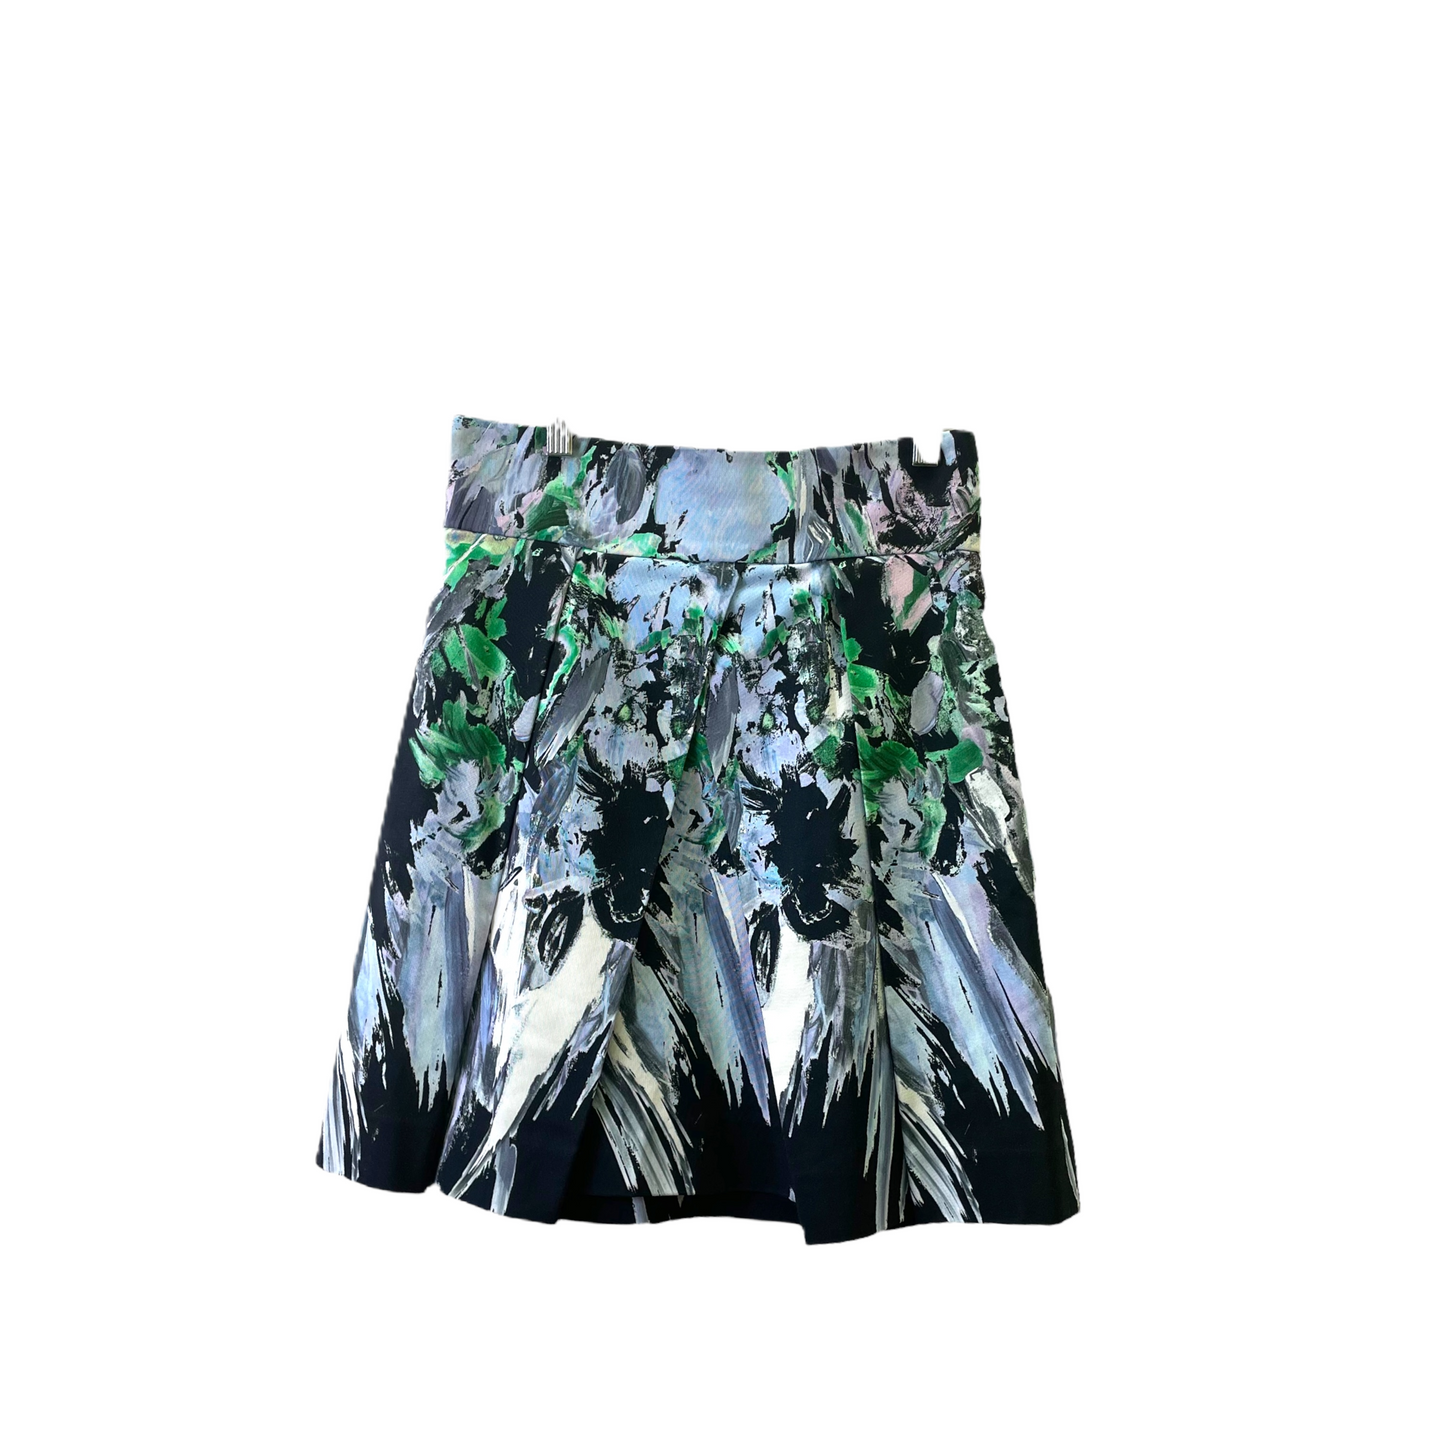 Skirt Designer By Milly  Size: 4